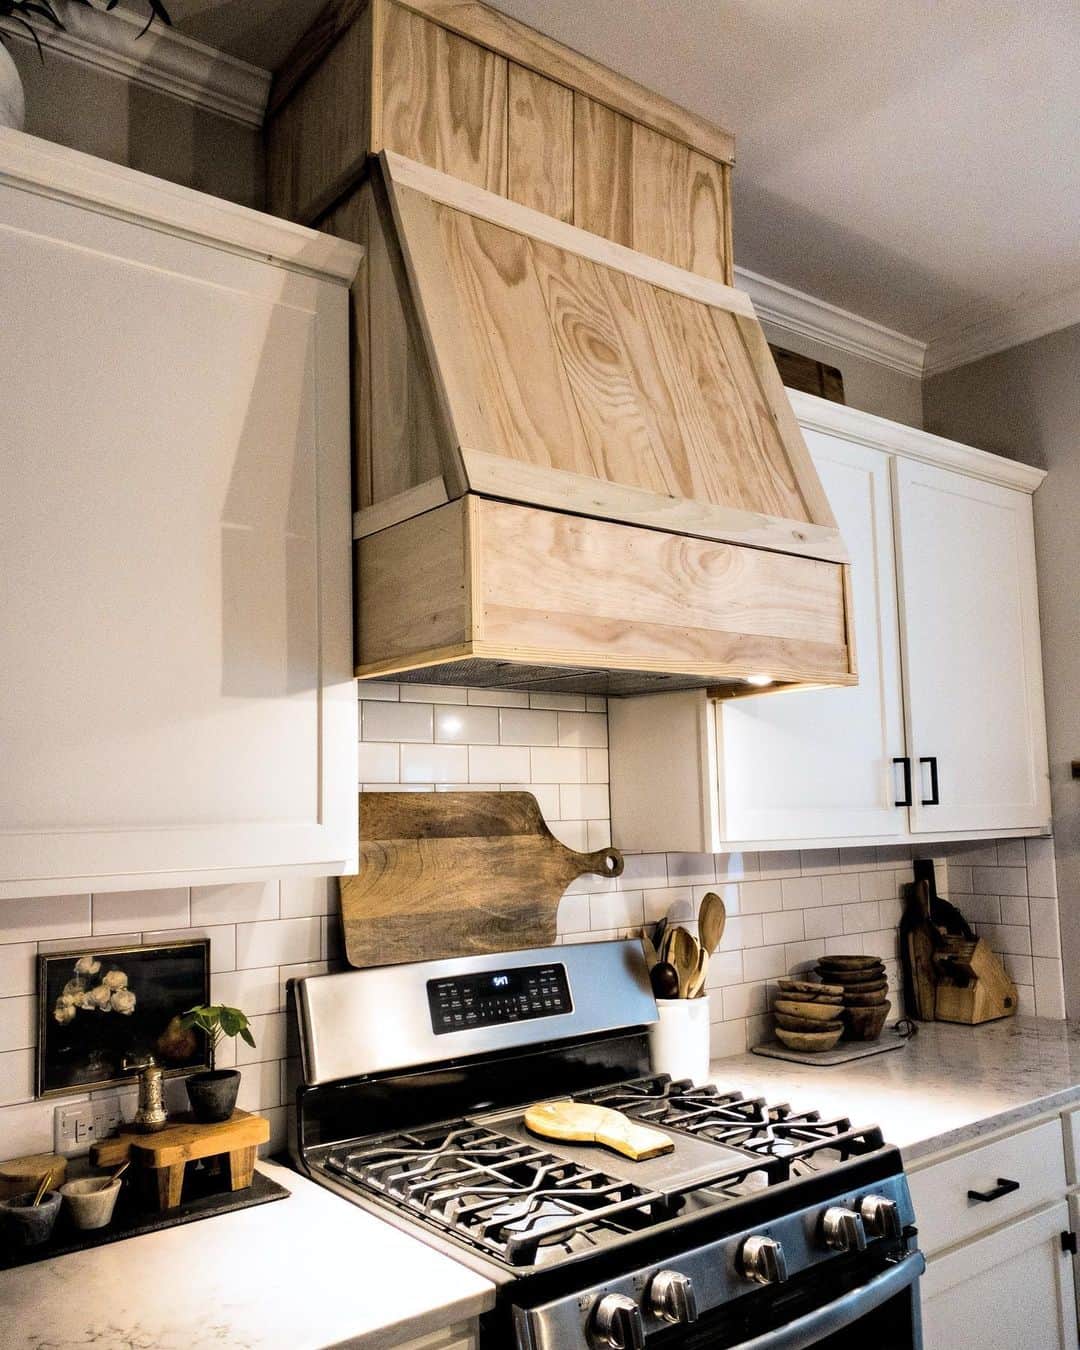 35 Wood Hood Vent Cover Ideas for an Inviting Kitchen